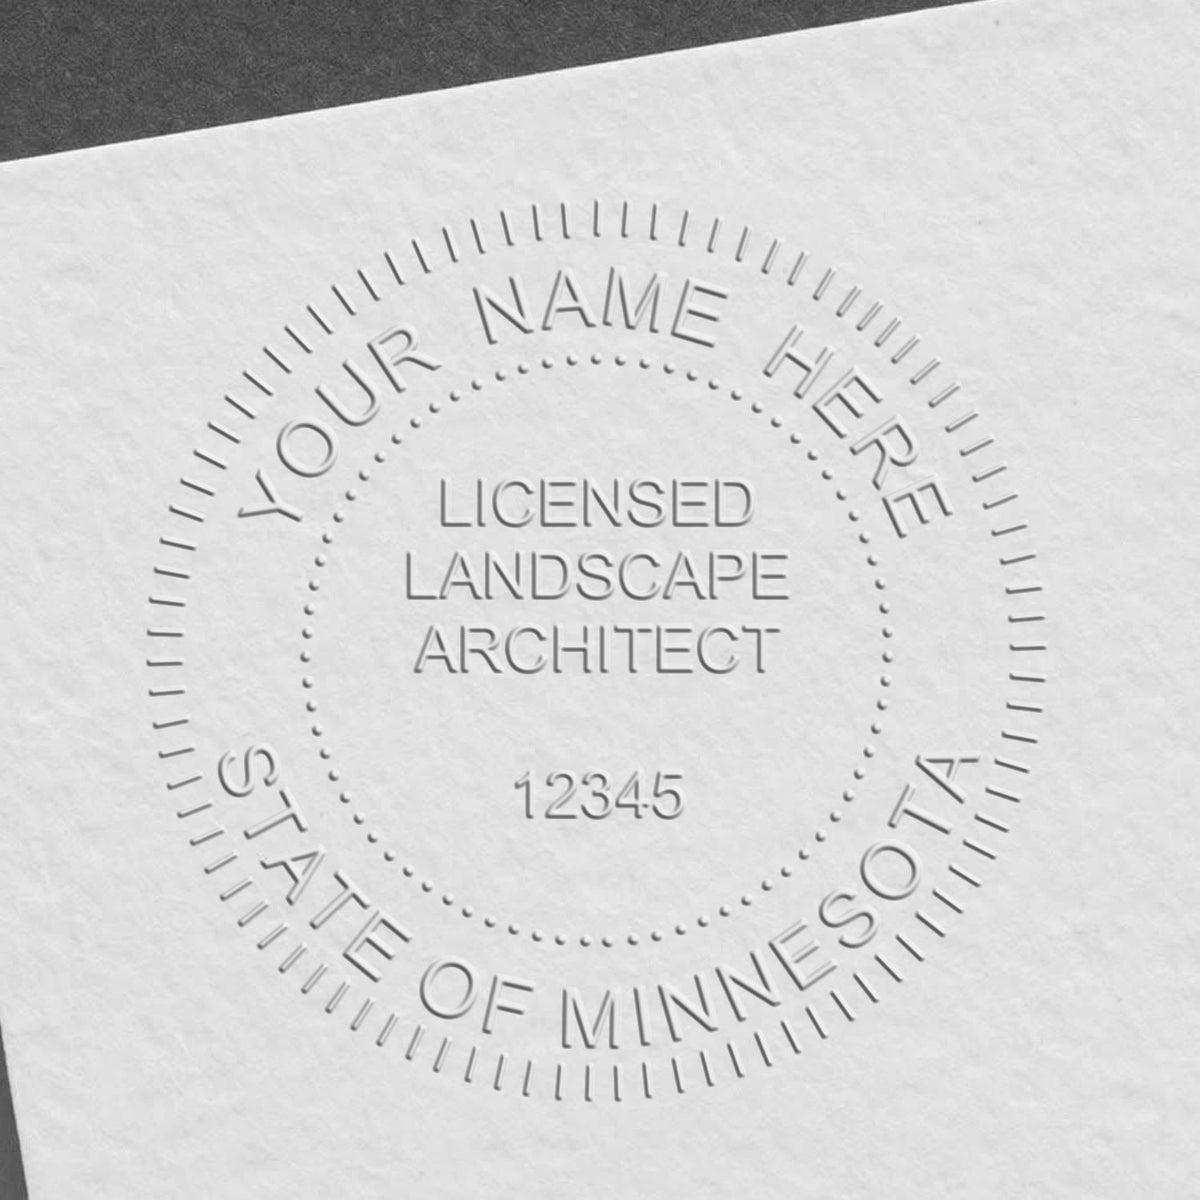 A photograph of the Hybrid Minnesota Landscape Architect Seal stamp impression reveals a vivid, professional image of the on paper.